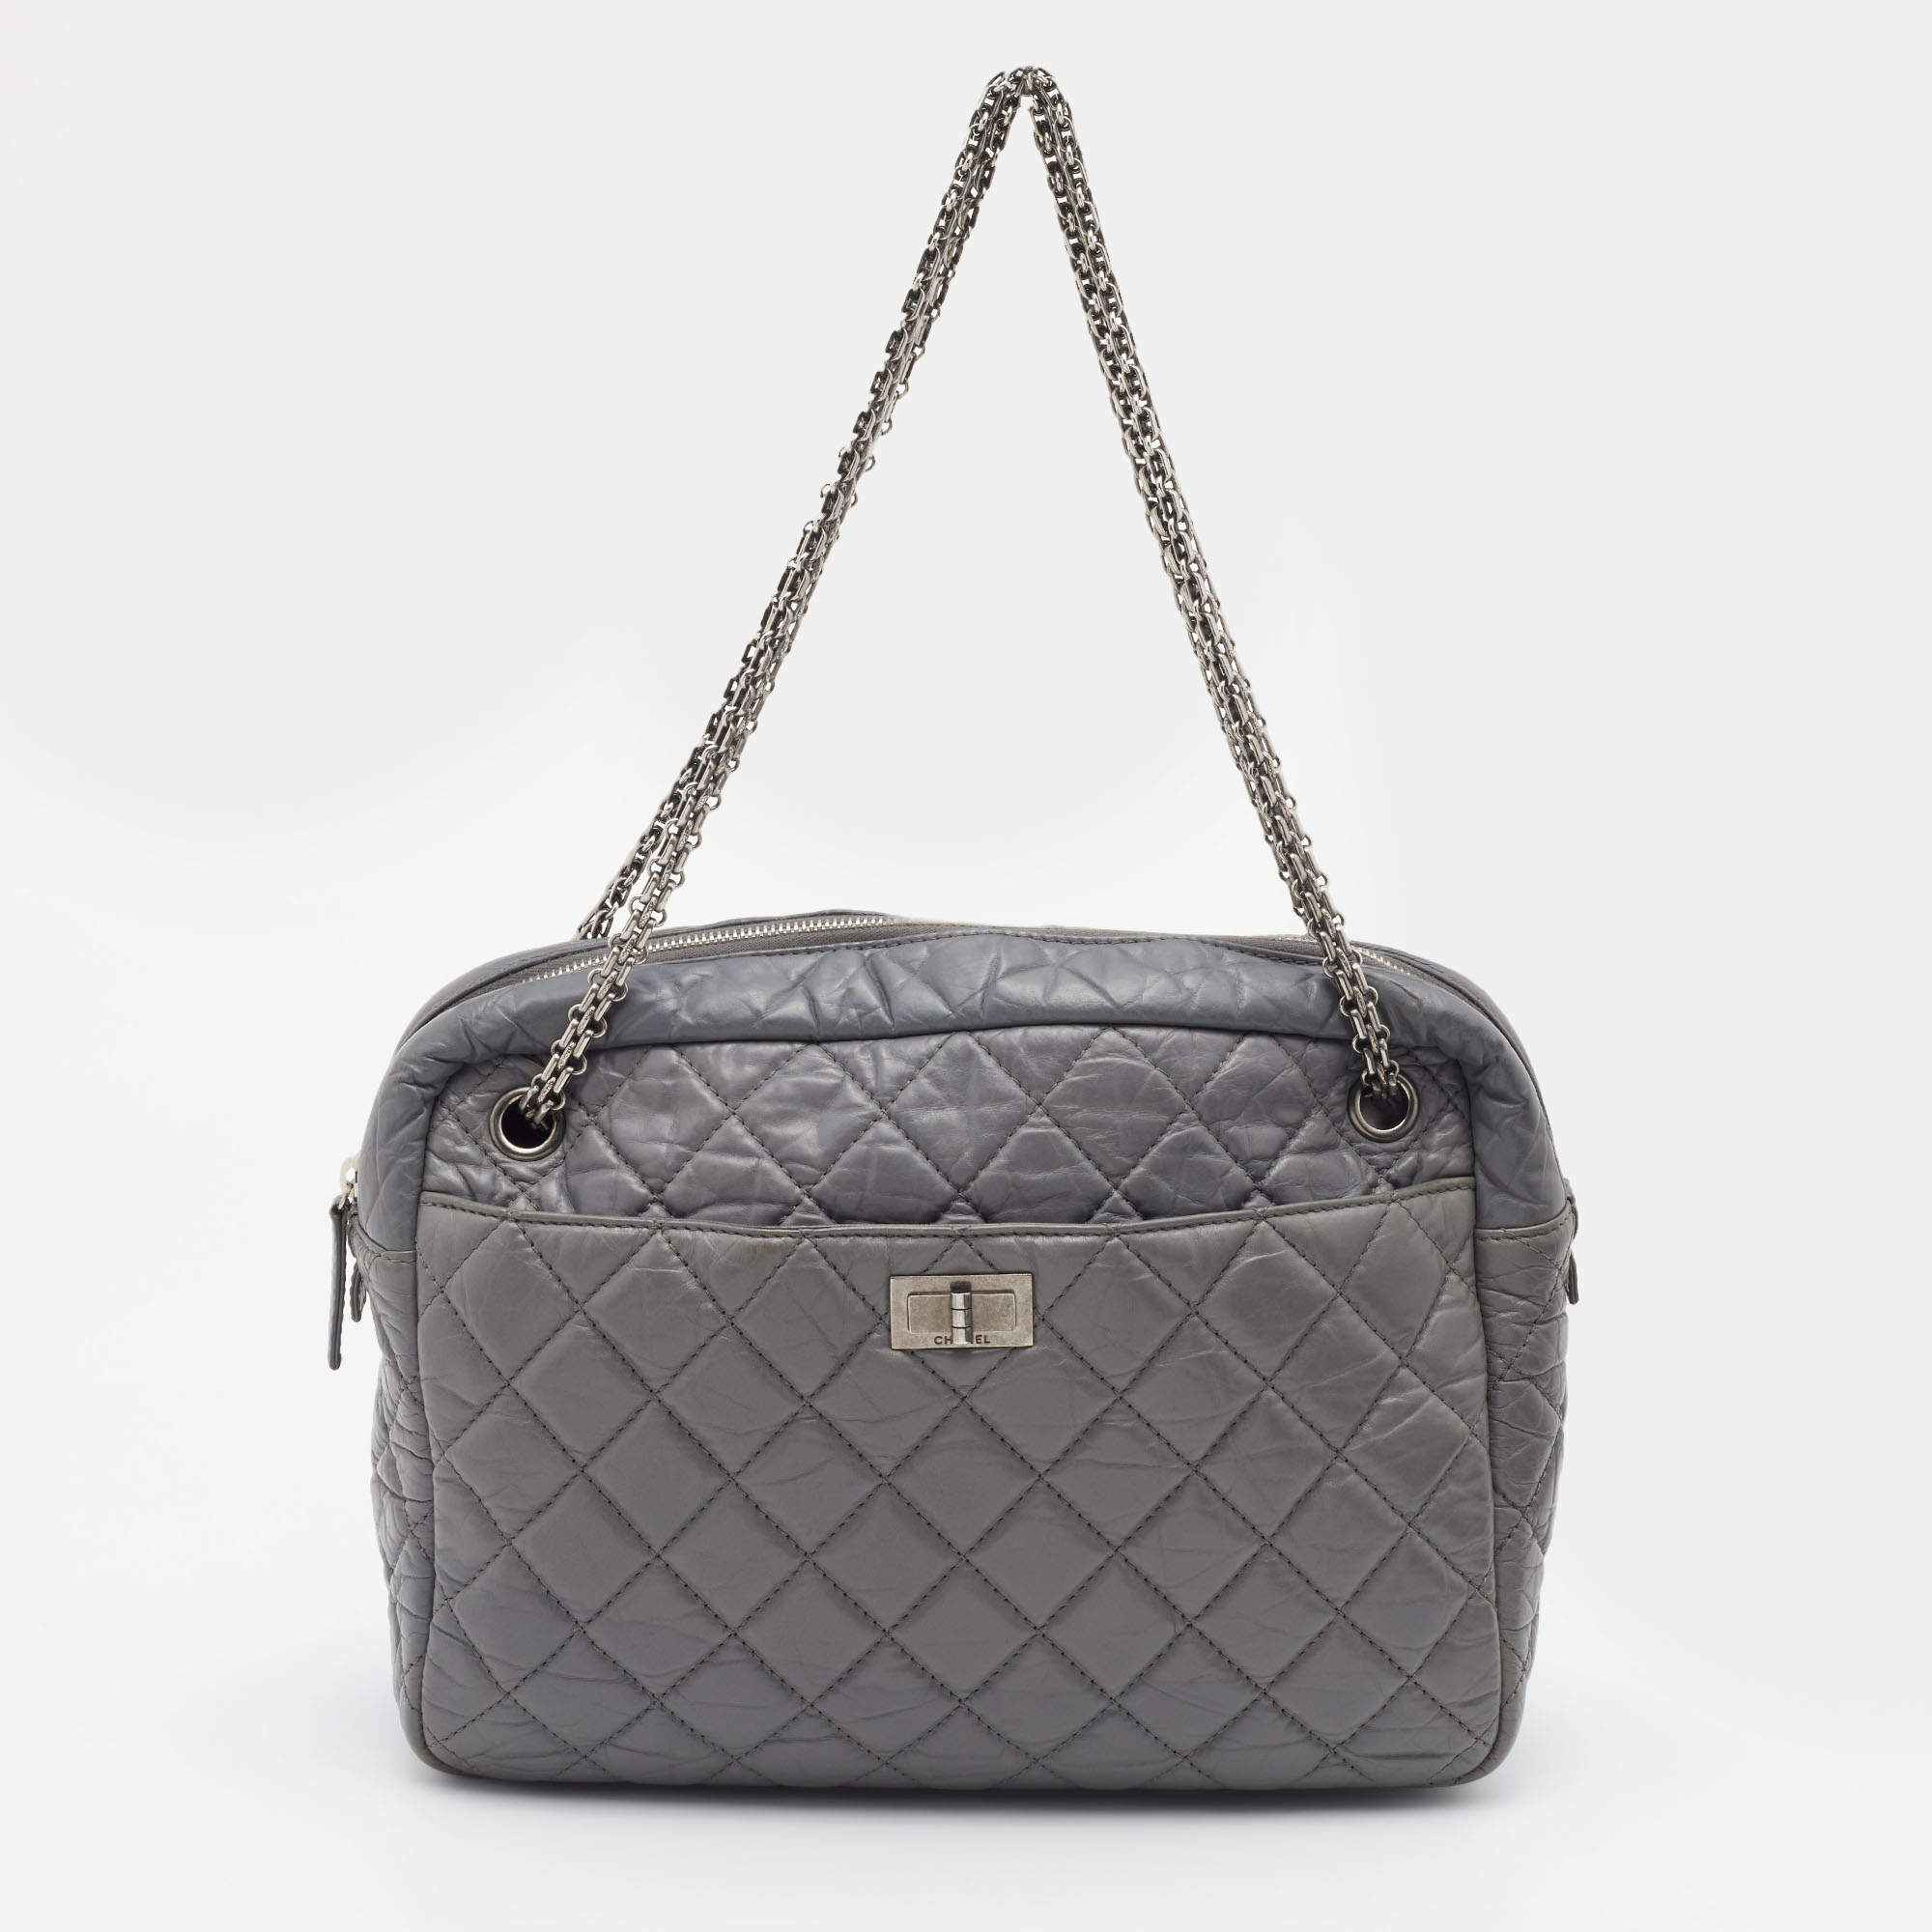 Chanel Grey Quilted Leather Large Reissue Camera Case Bag Chanel | The ...